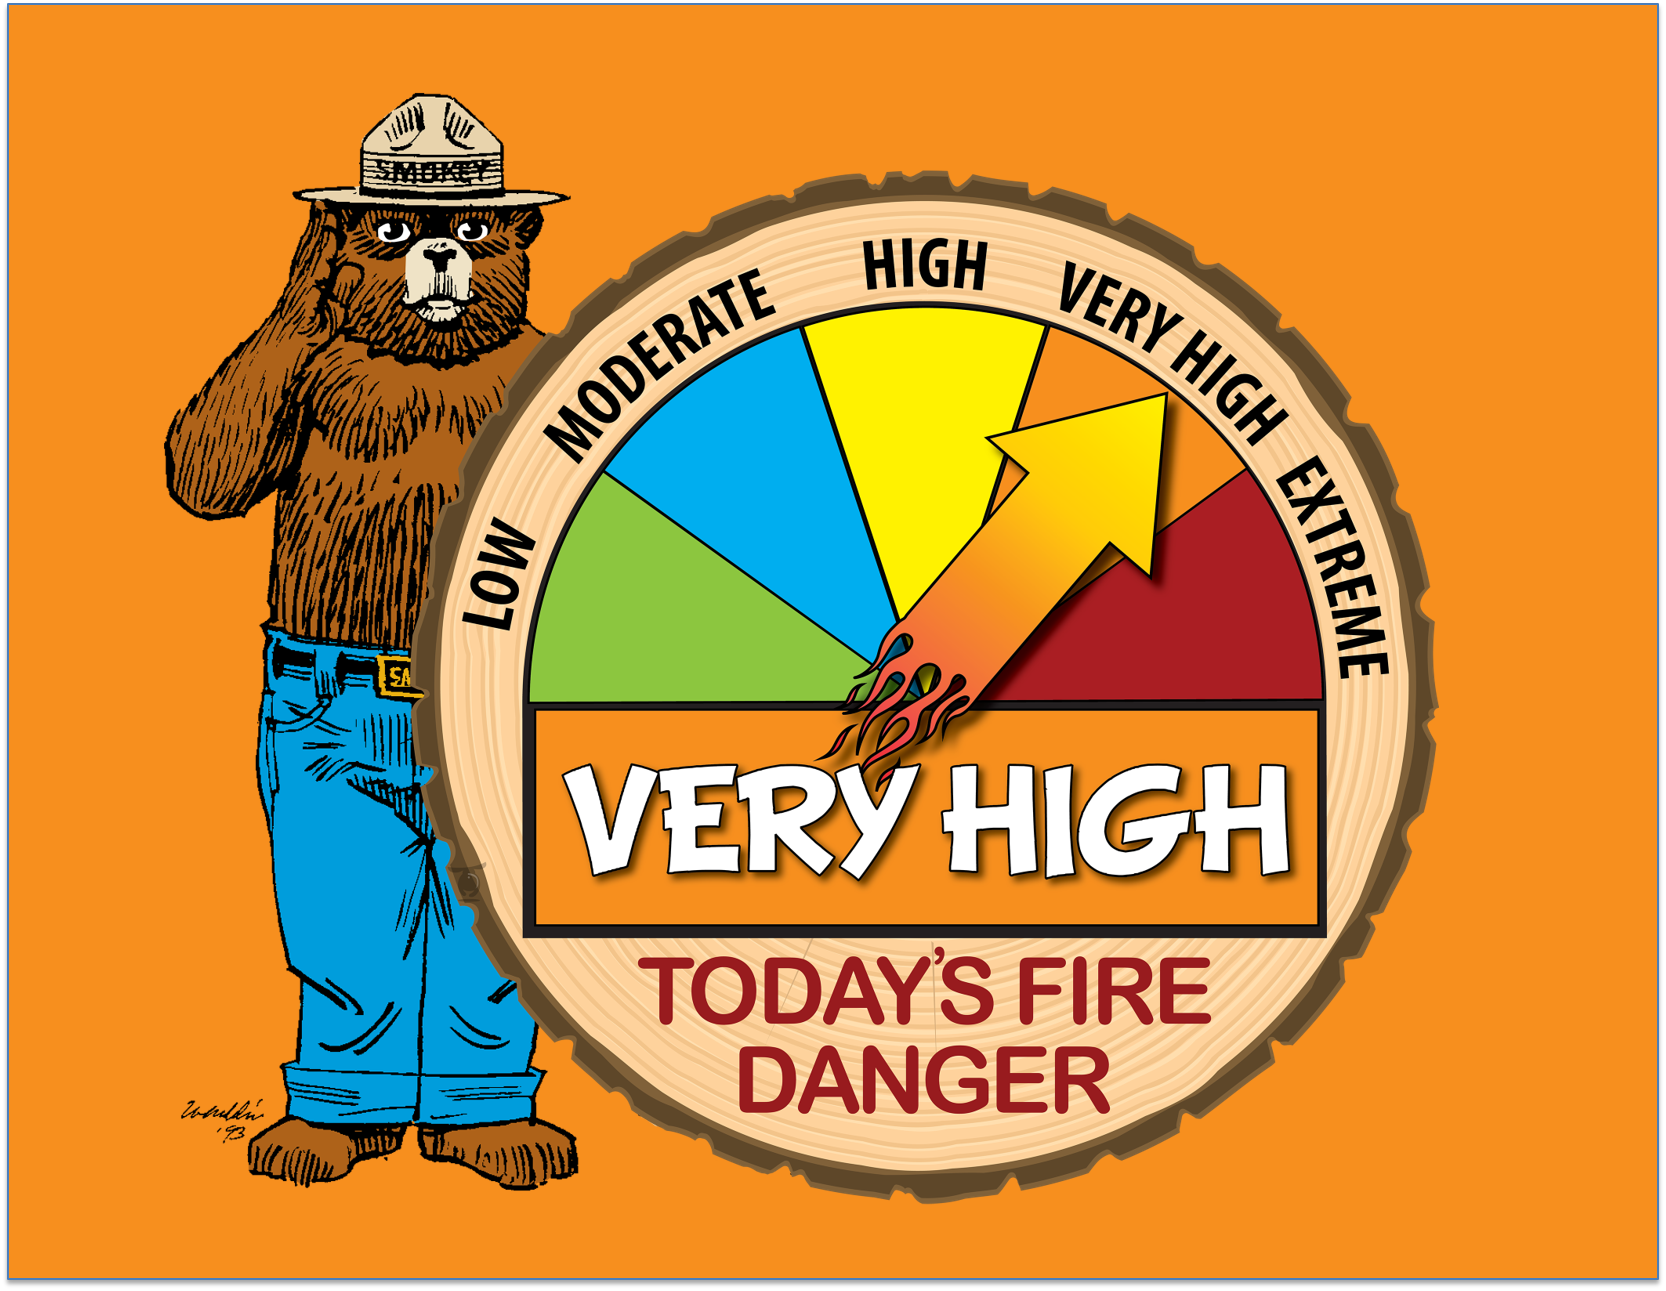 Smokey Bear and Very High Fire Danger rating sign